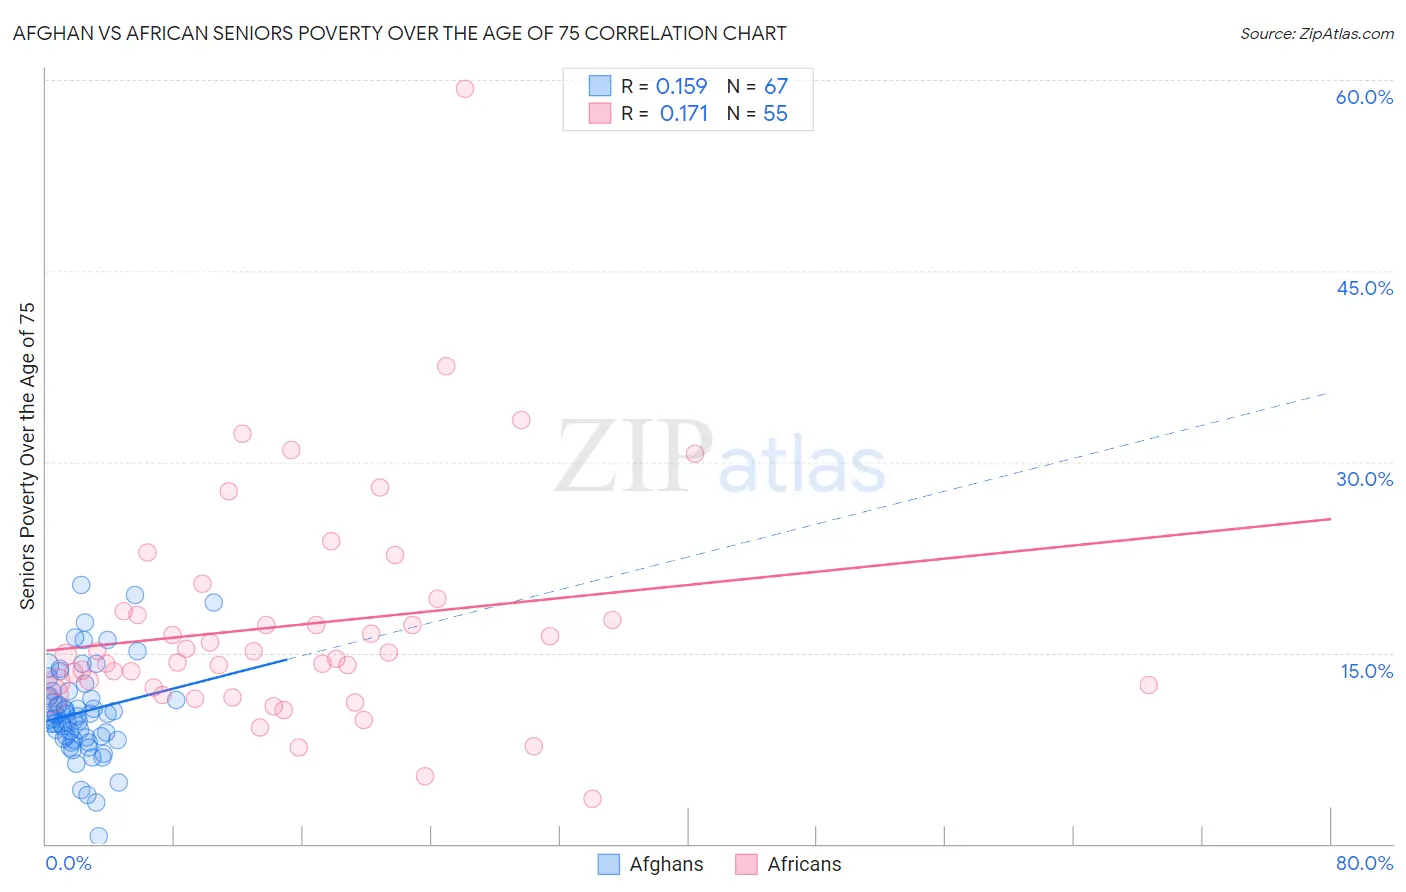 Afghan vs African Seniors Poverty Over the Age of 75